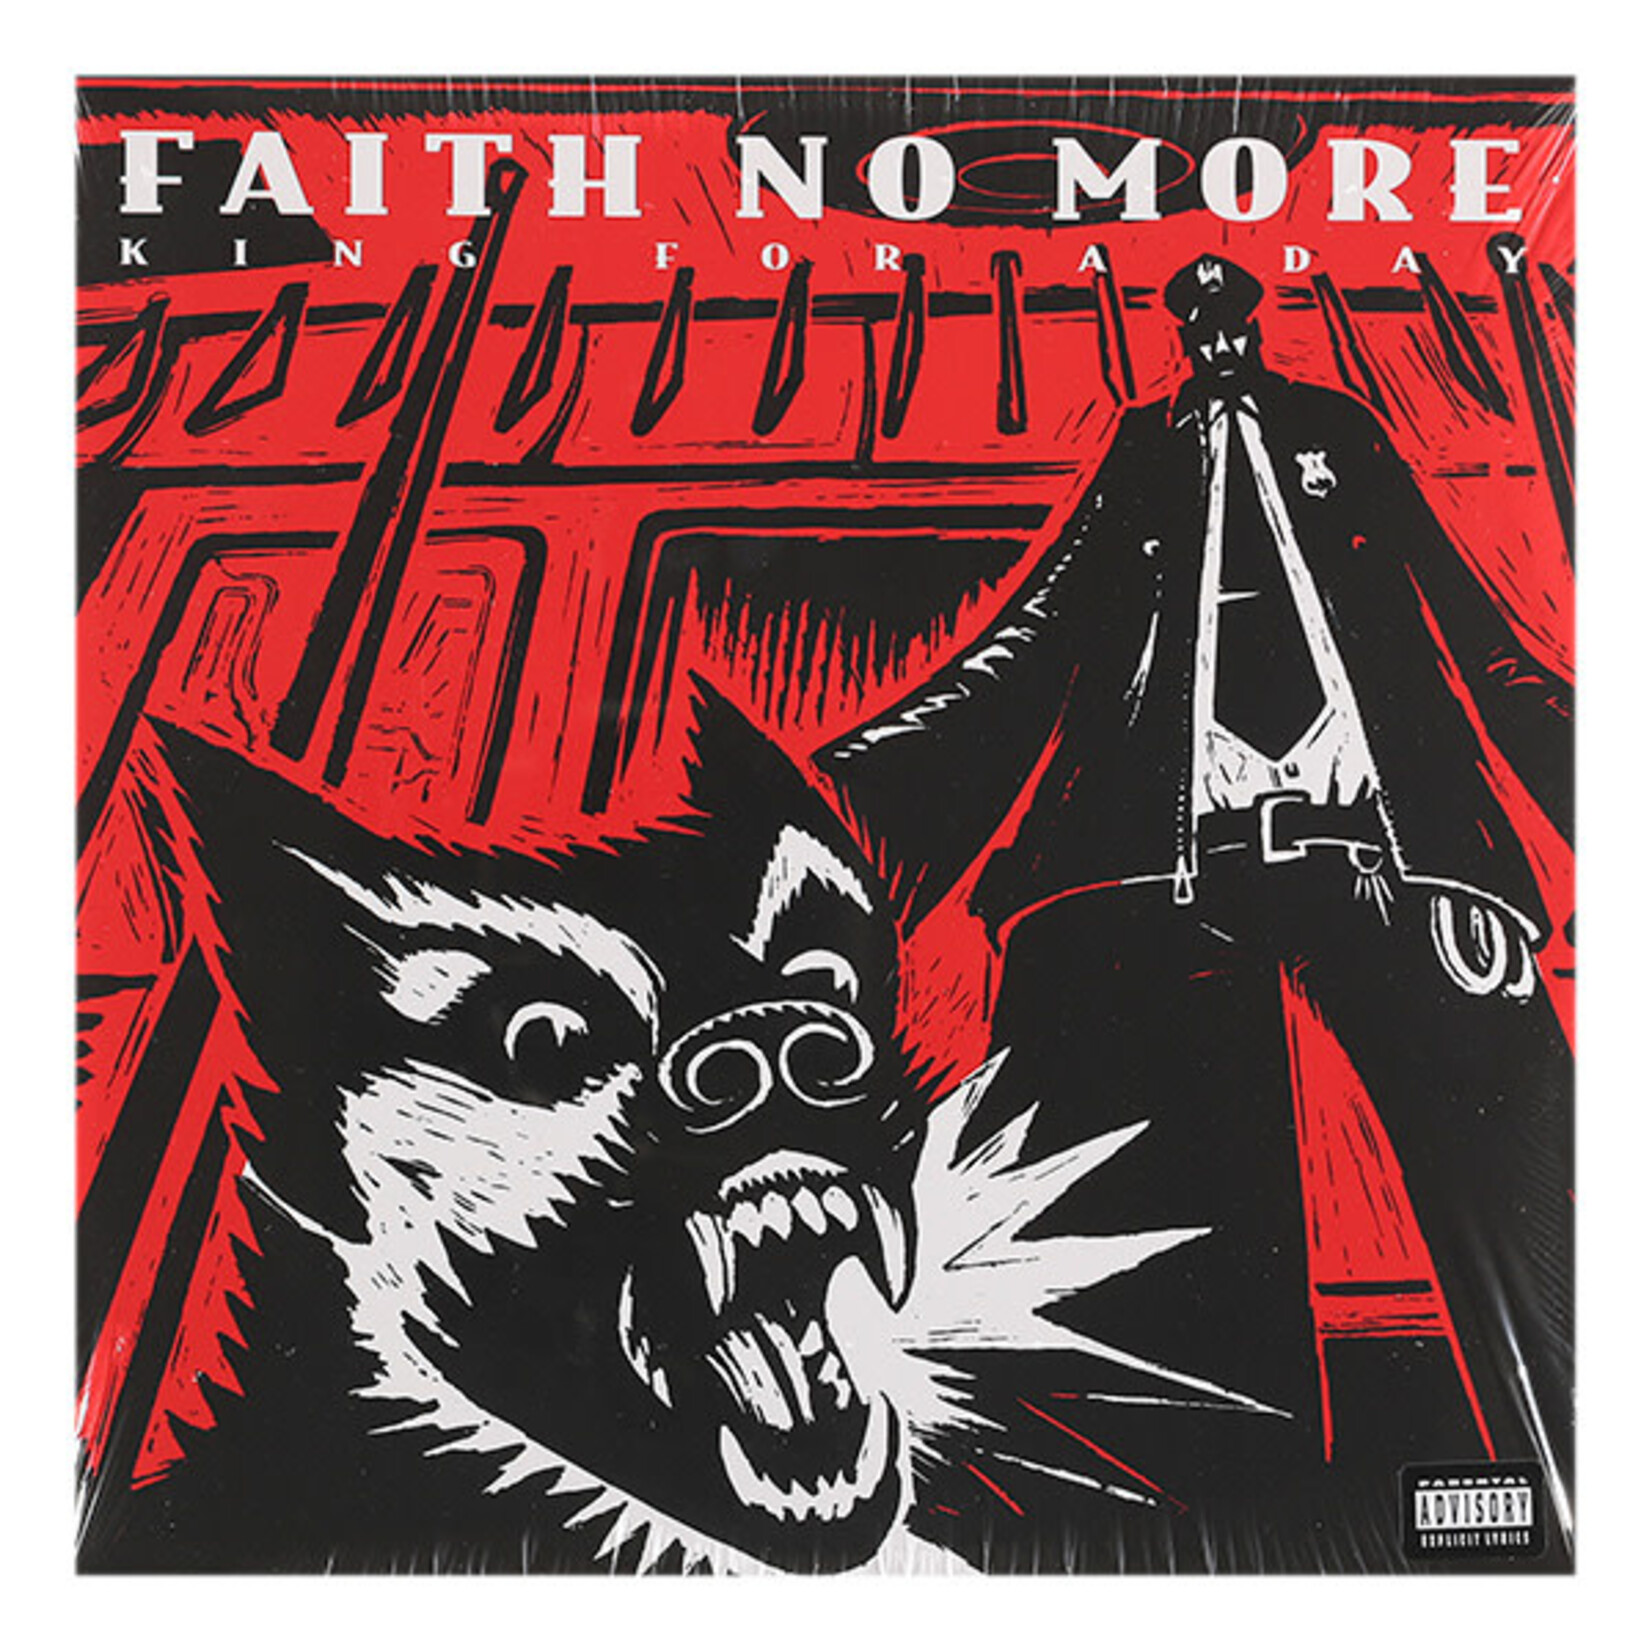 FAITH NO MORE - KING FOR A DAY - 2LP